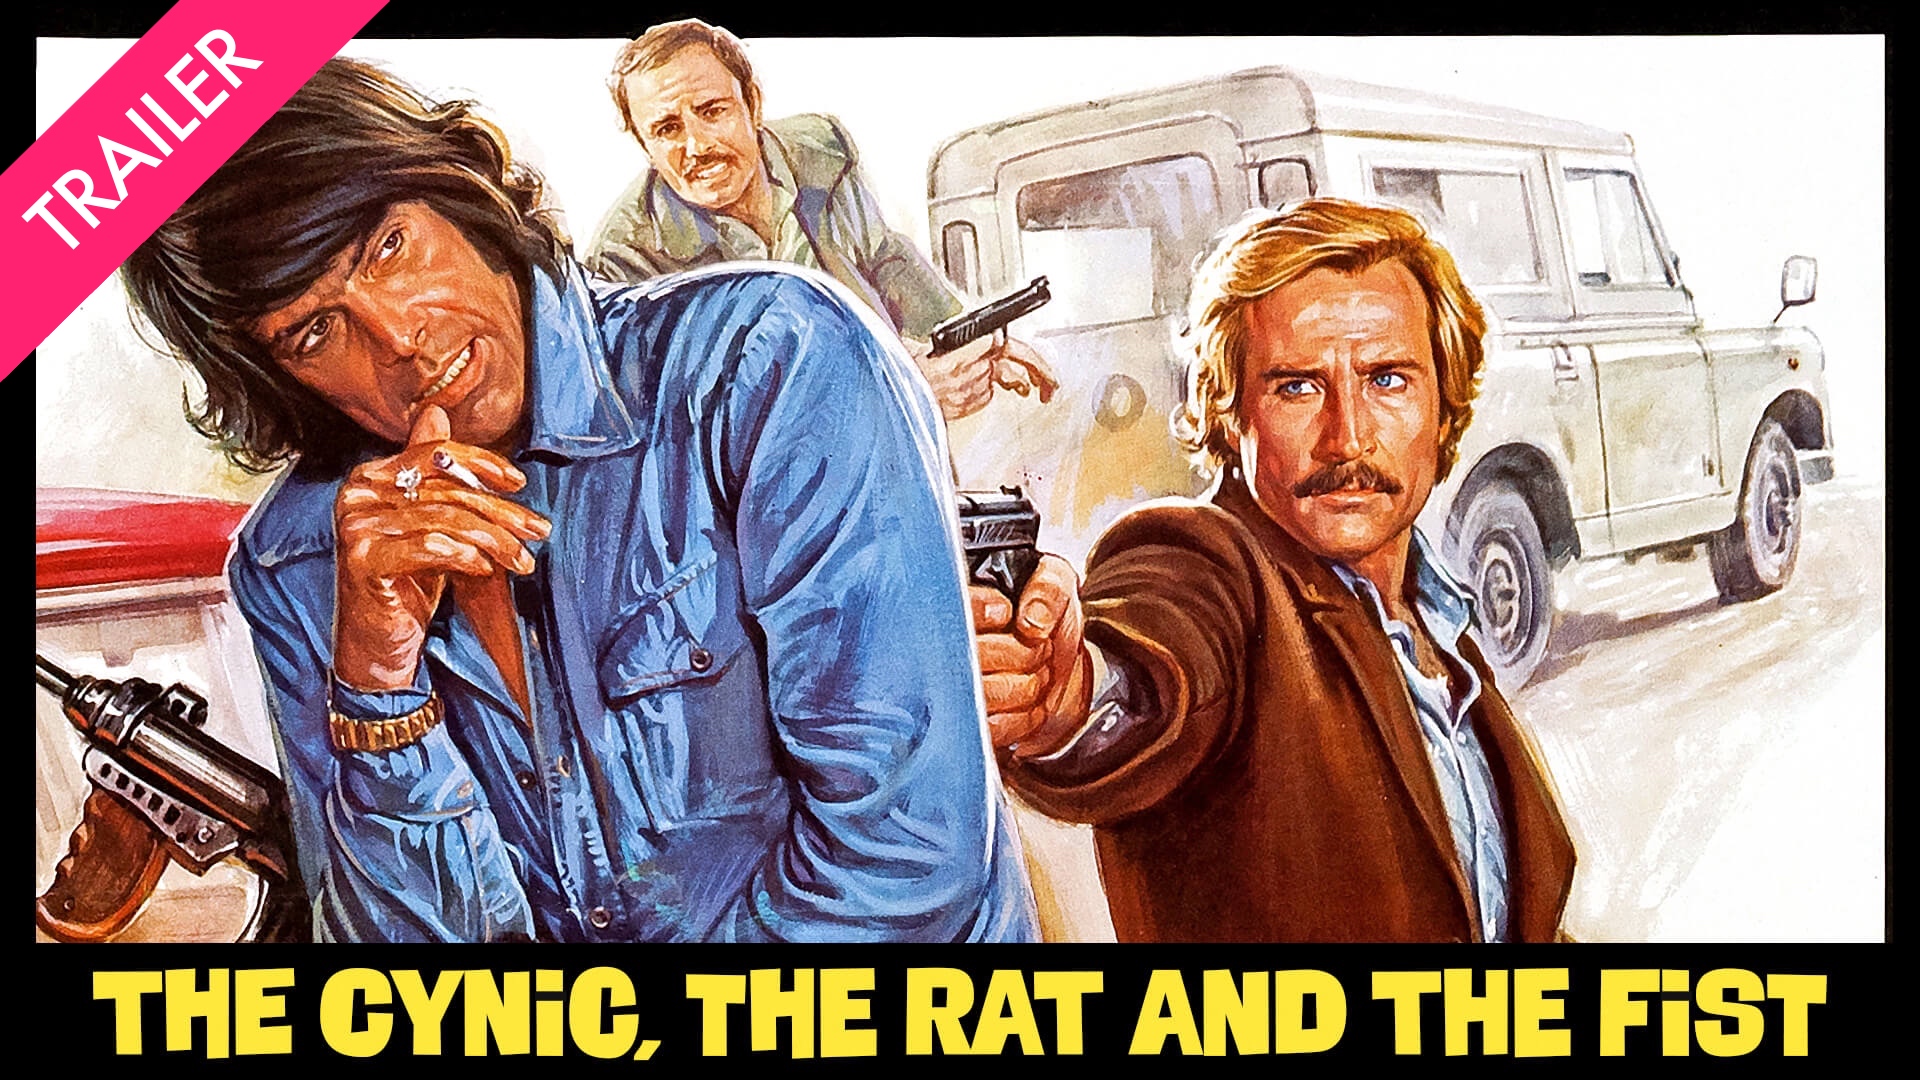 The Cynic, the Rat, and the Fist